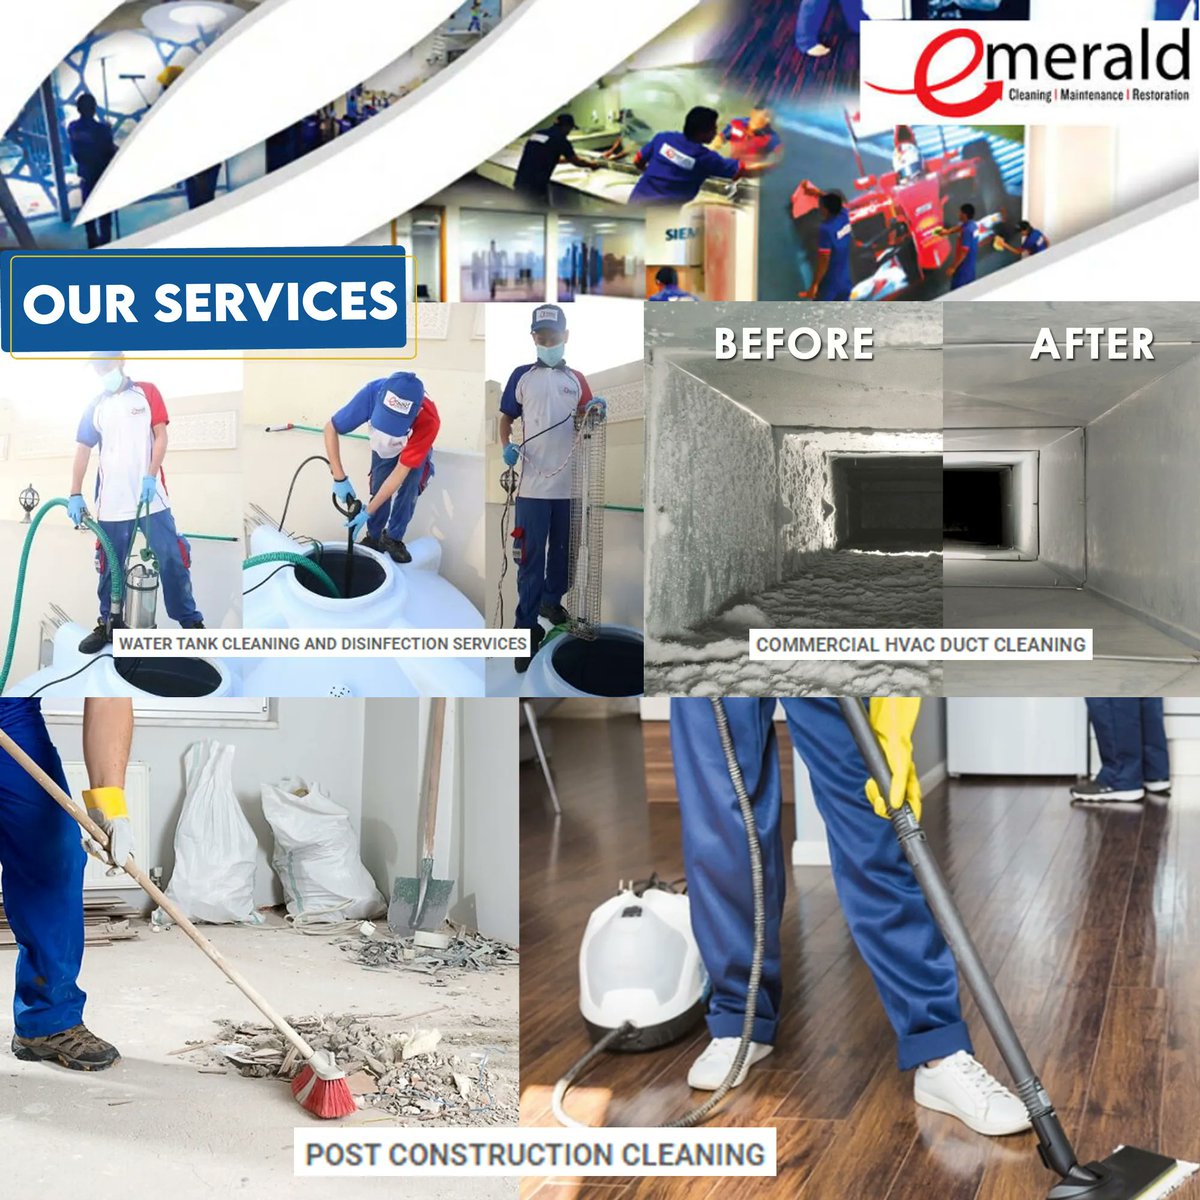 We will offer full range of Cleaning & Maintenance Services! 
Shop at buff.ly/3ZBQJk1 
#cleaning #MaintenanceTechnician #services #hvac #postconstructioncleaning #watertankcleaning #getitqatar #qatarliving